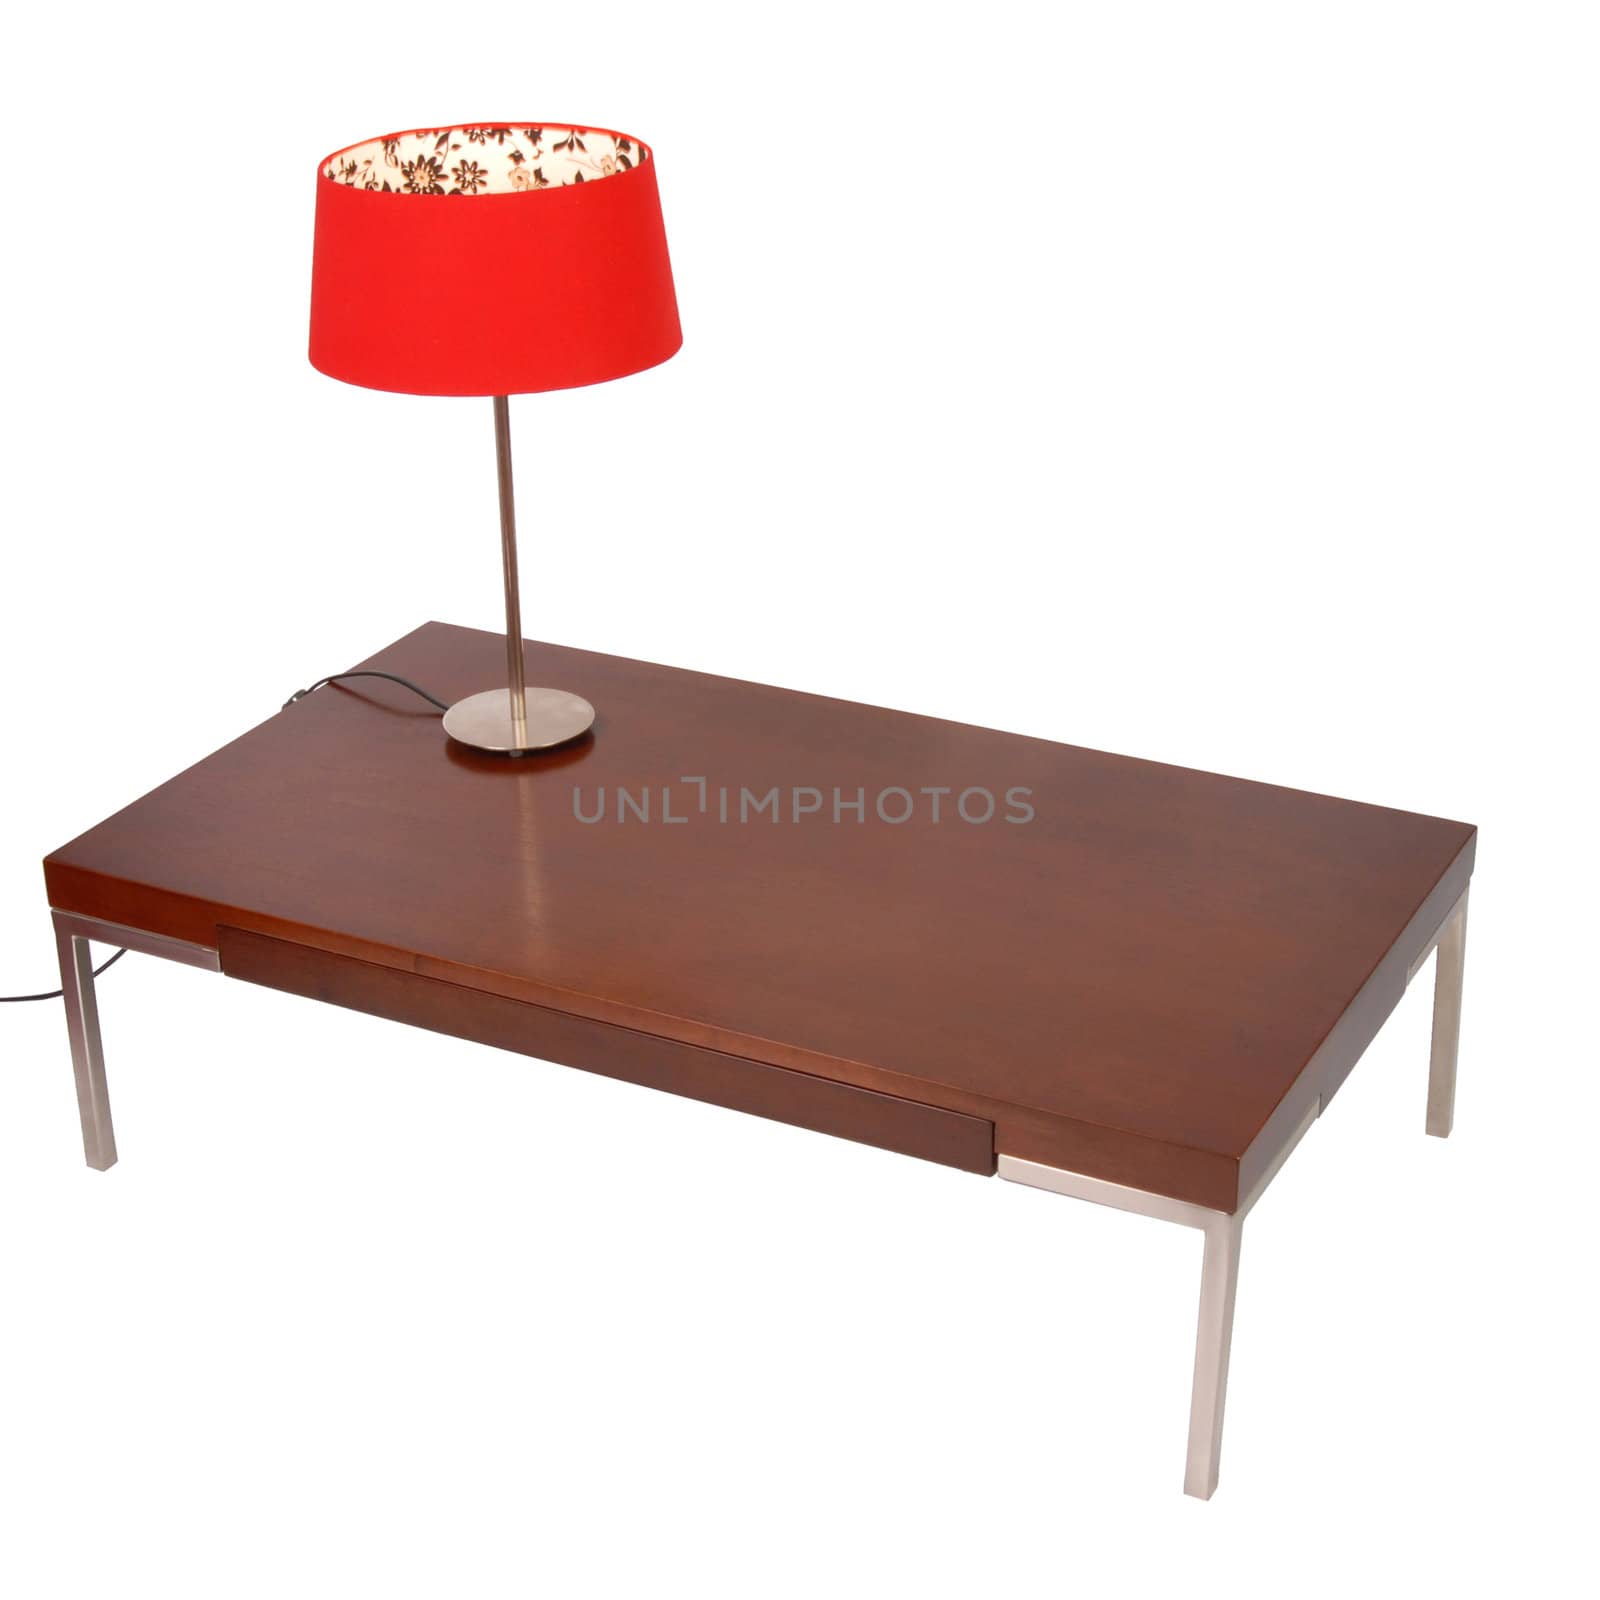 Red lamp on a wooden coffee table. Contemporary style. Isolated on white background